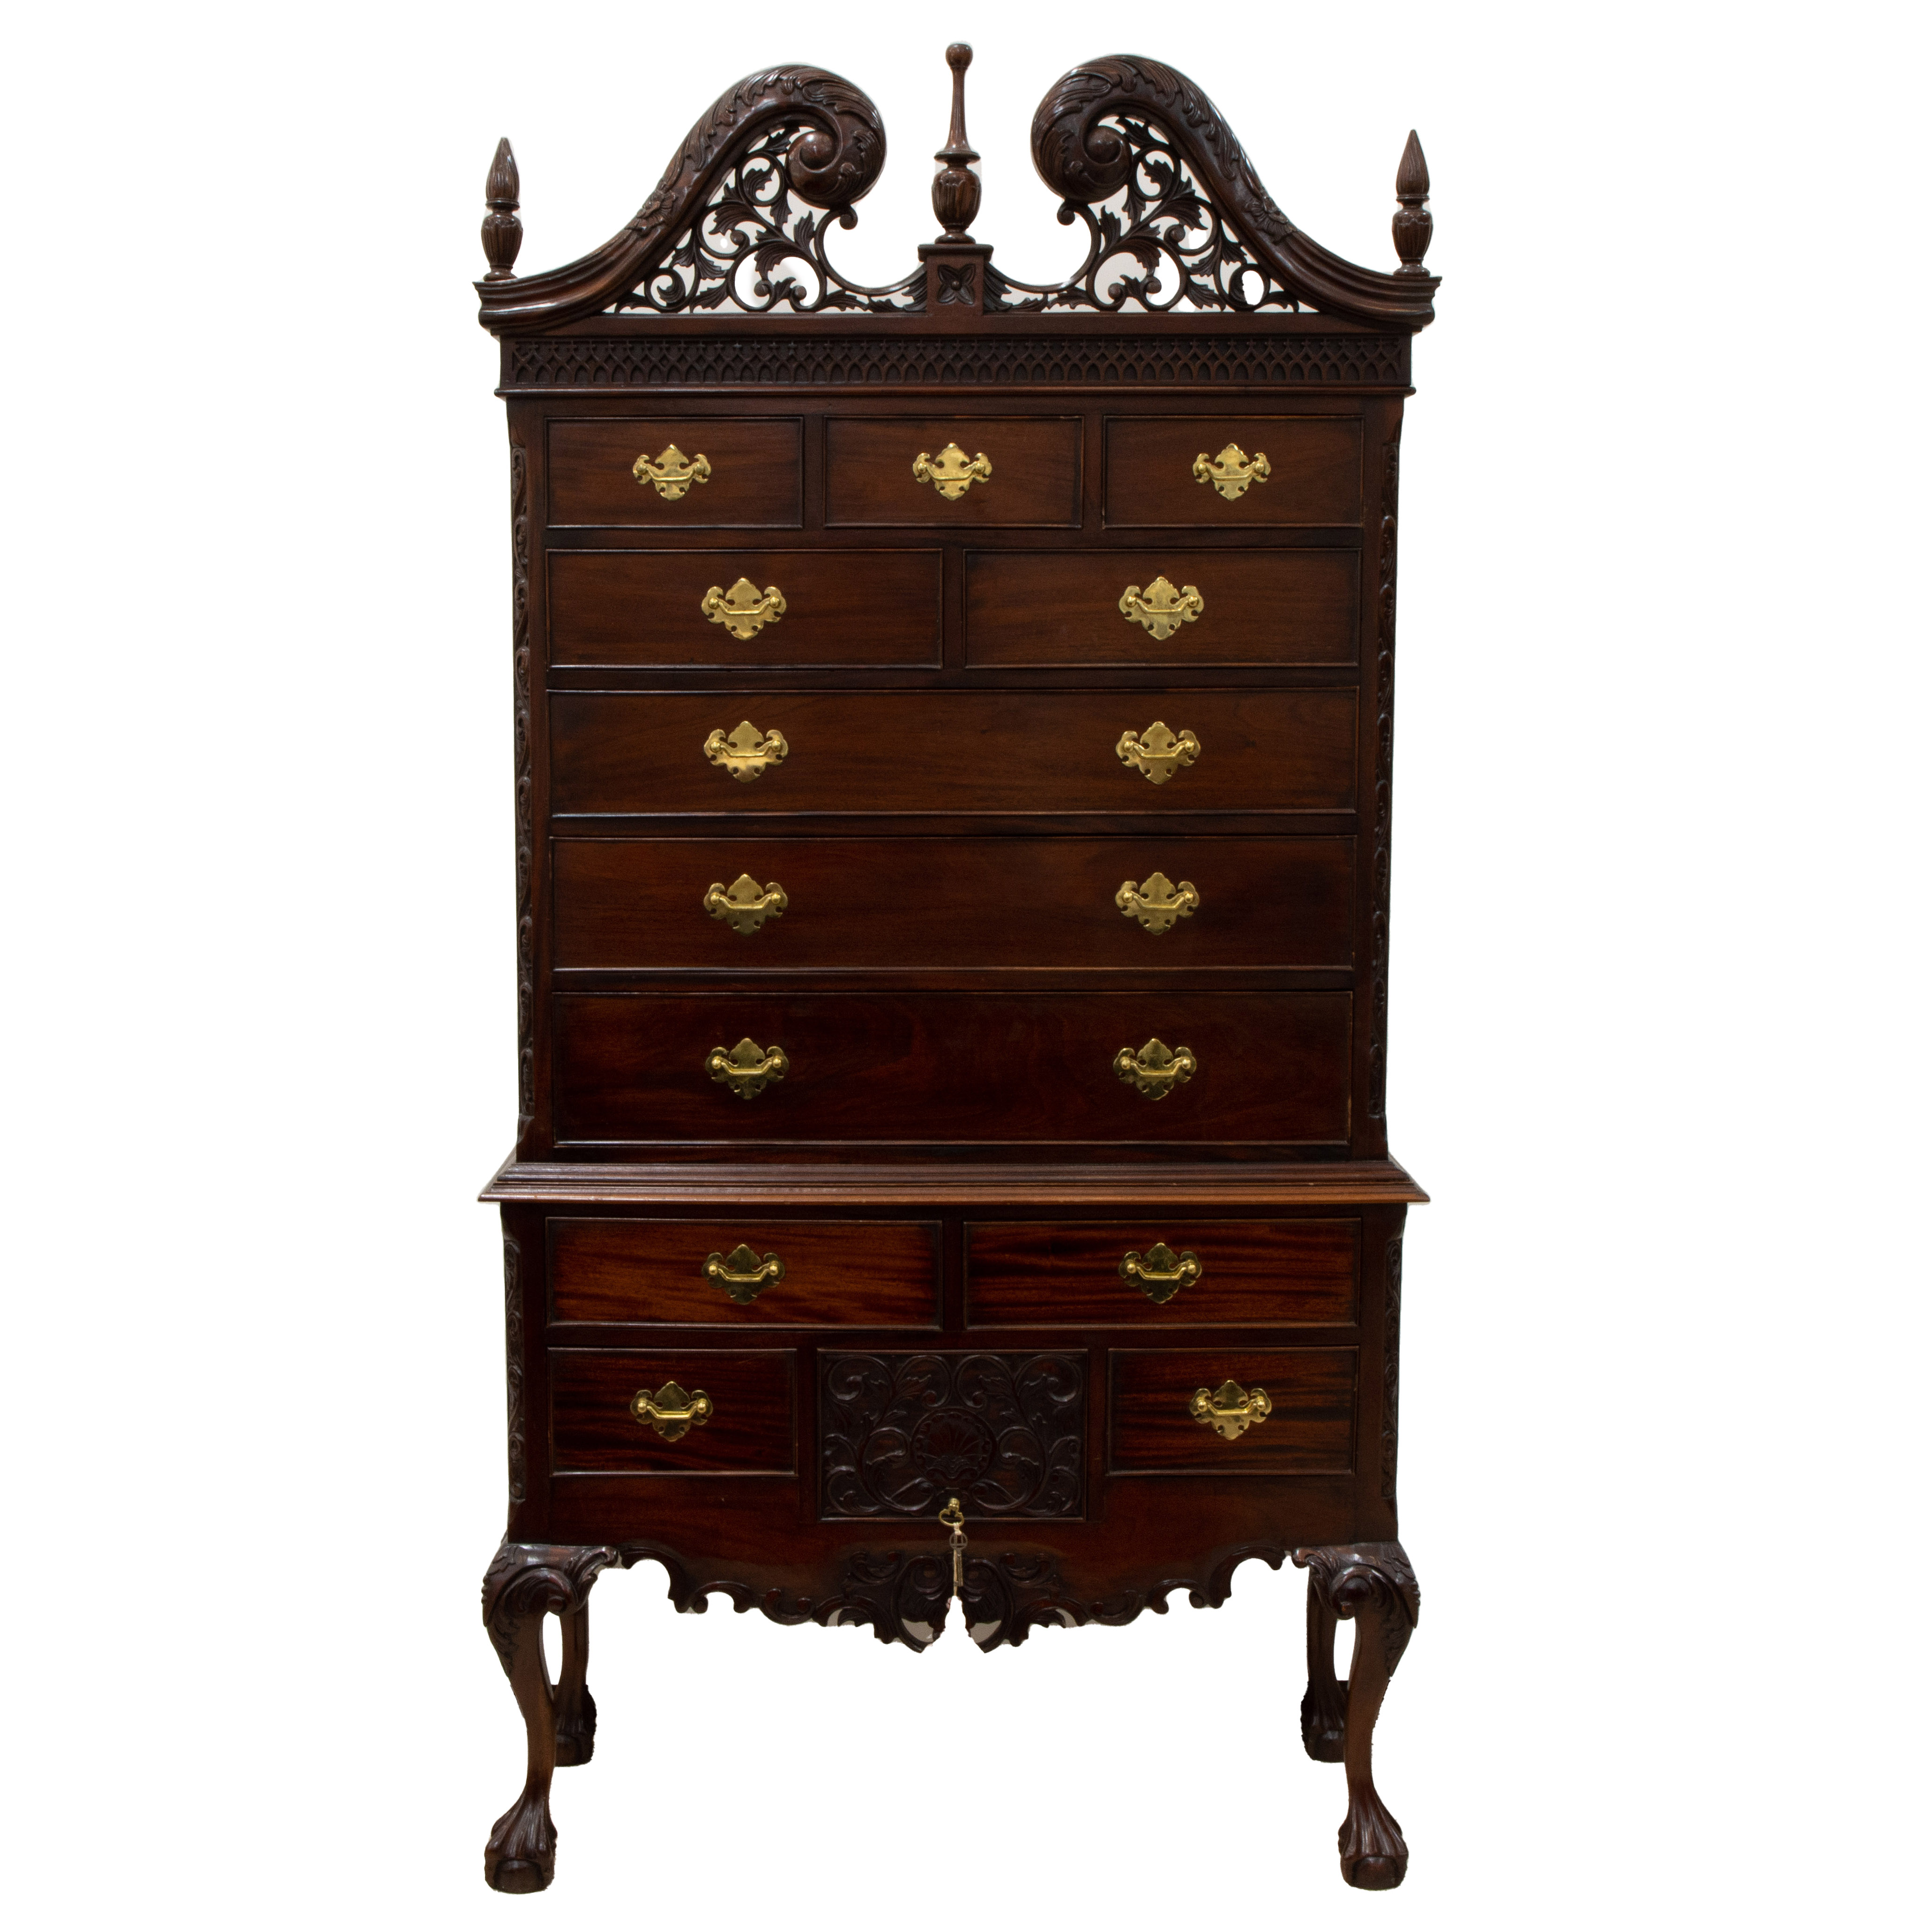 High chest of drawers in mahogany Chippendale style